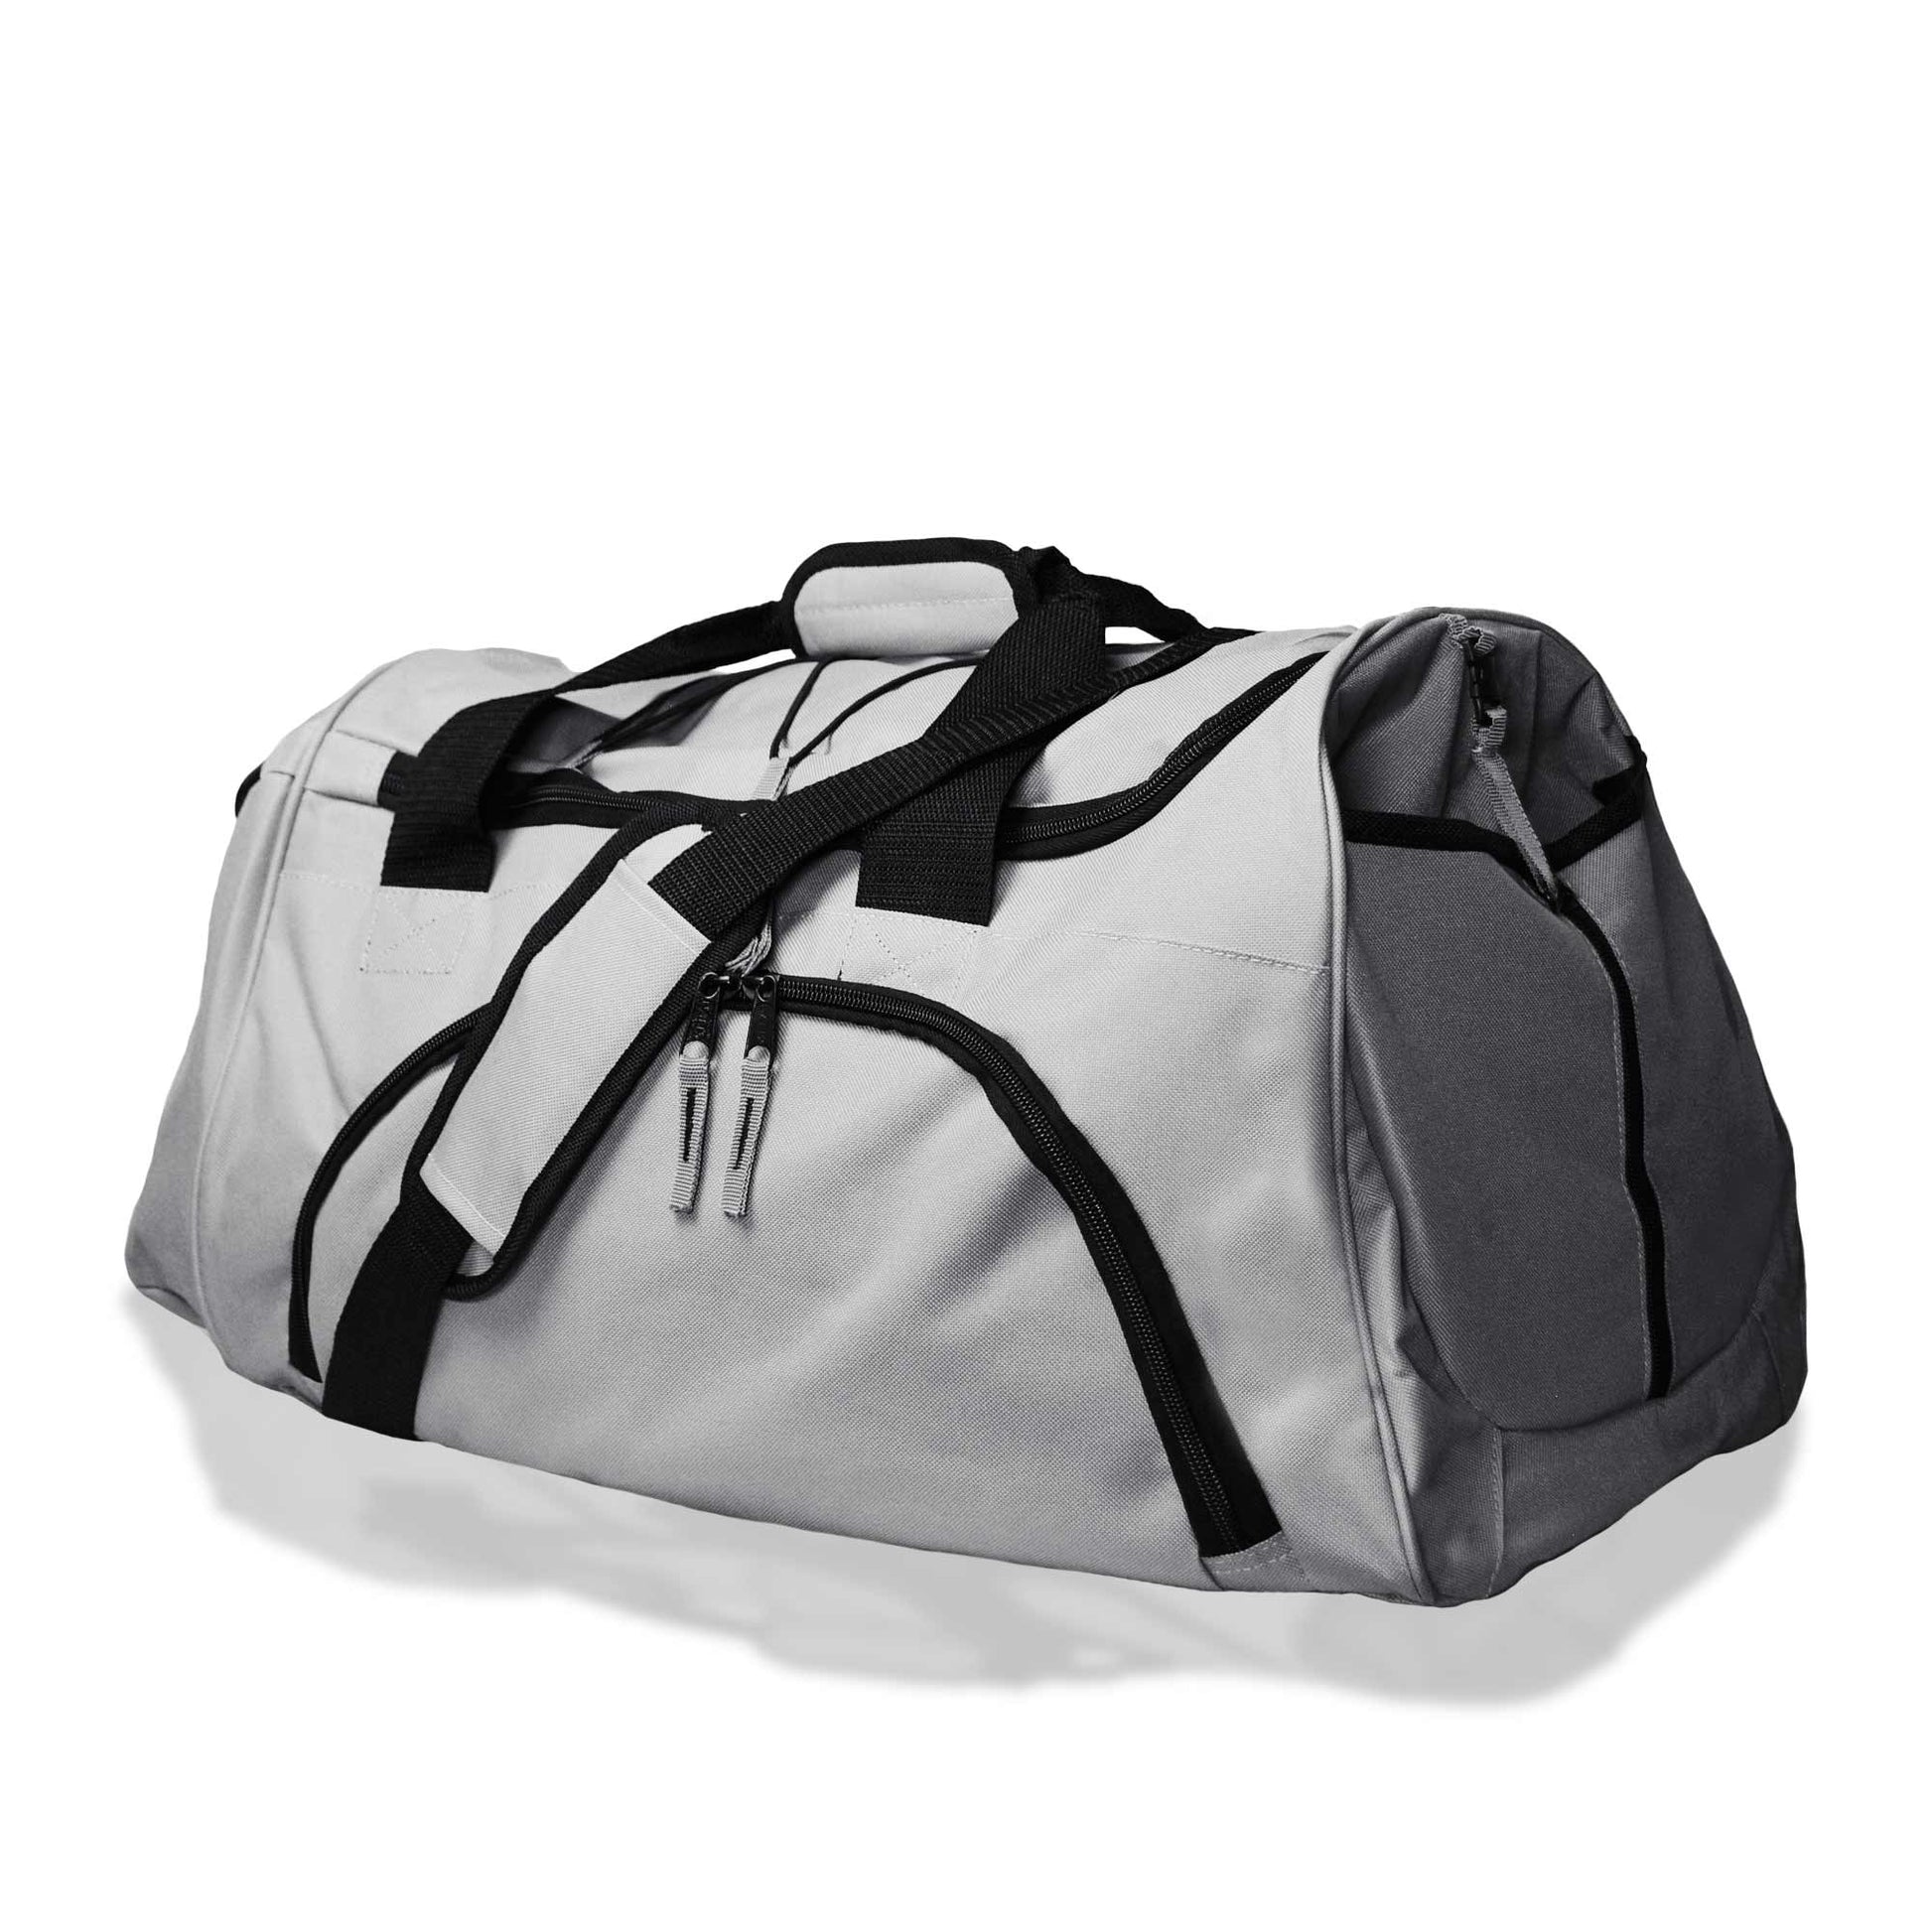 DALIX 20 Sports Duffle Bag w Water Bottle Mesh and Valuables